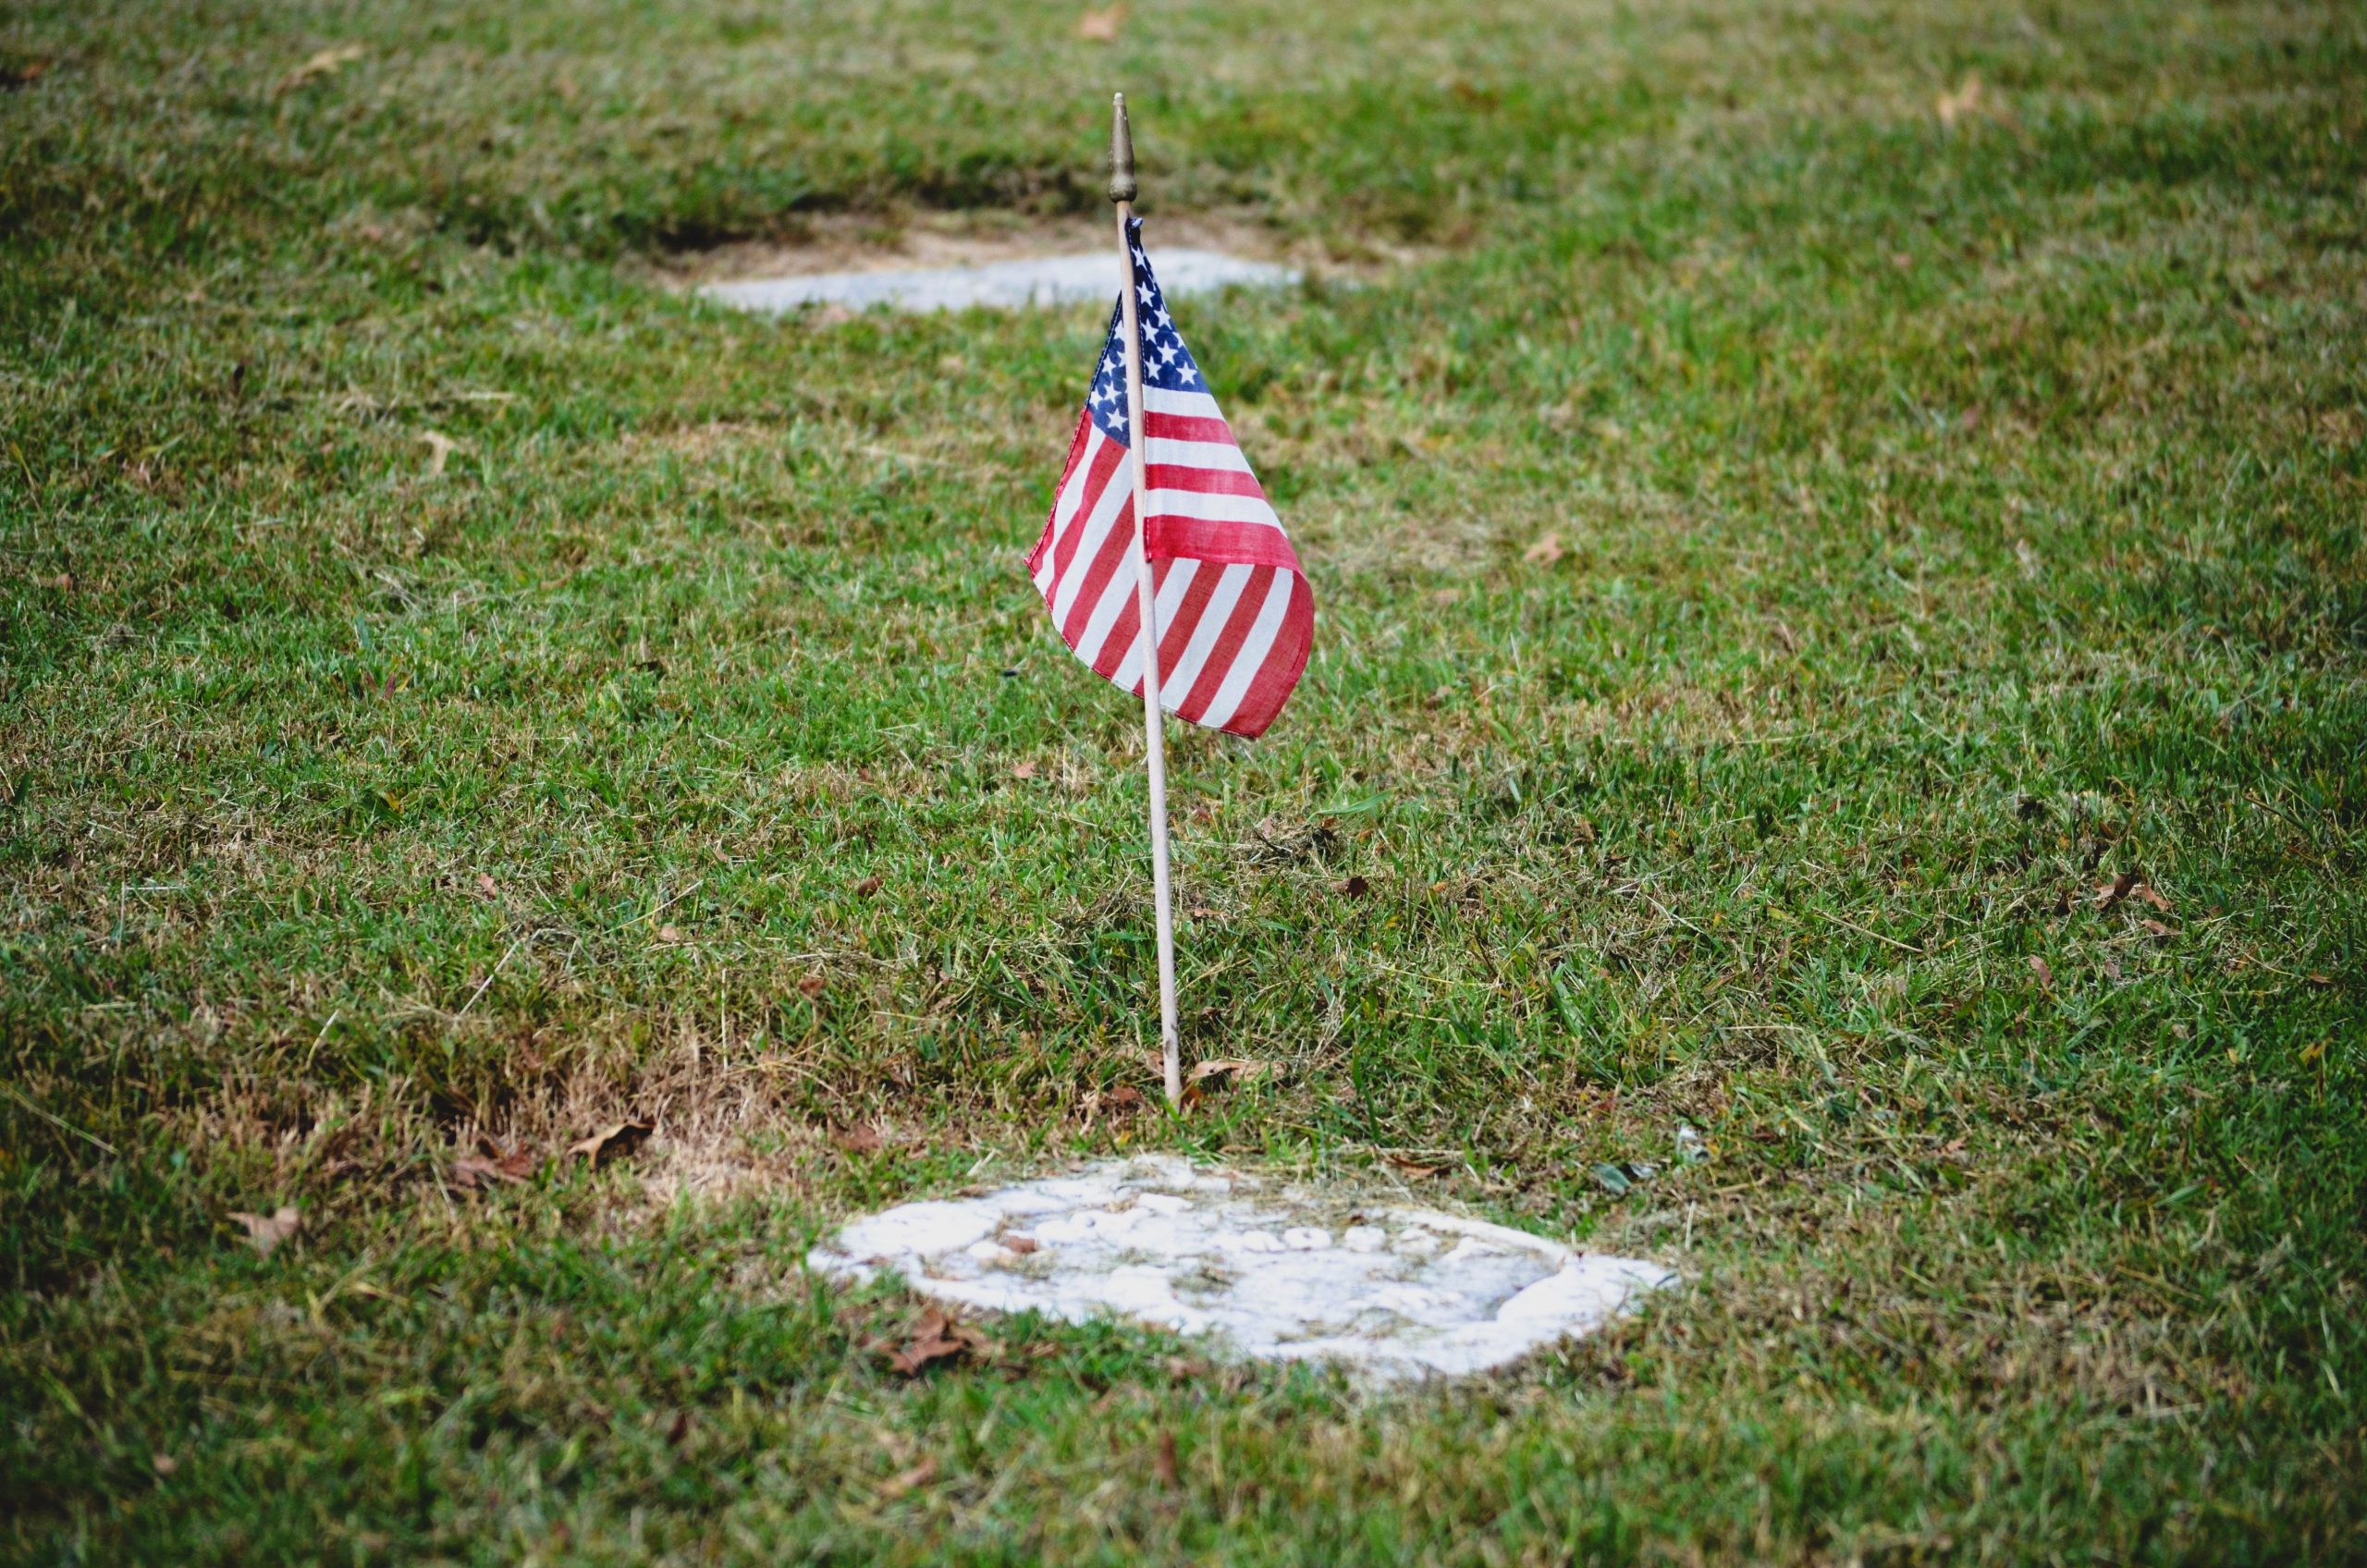 Louisiana cemetery changes contract after denying burial to a Black Sherrif deputy